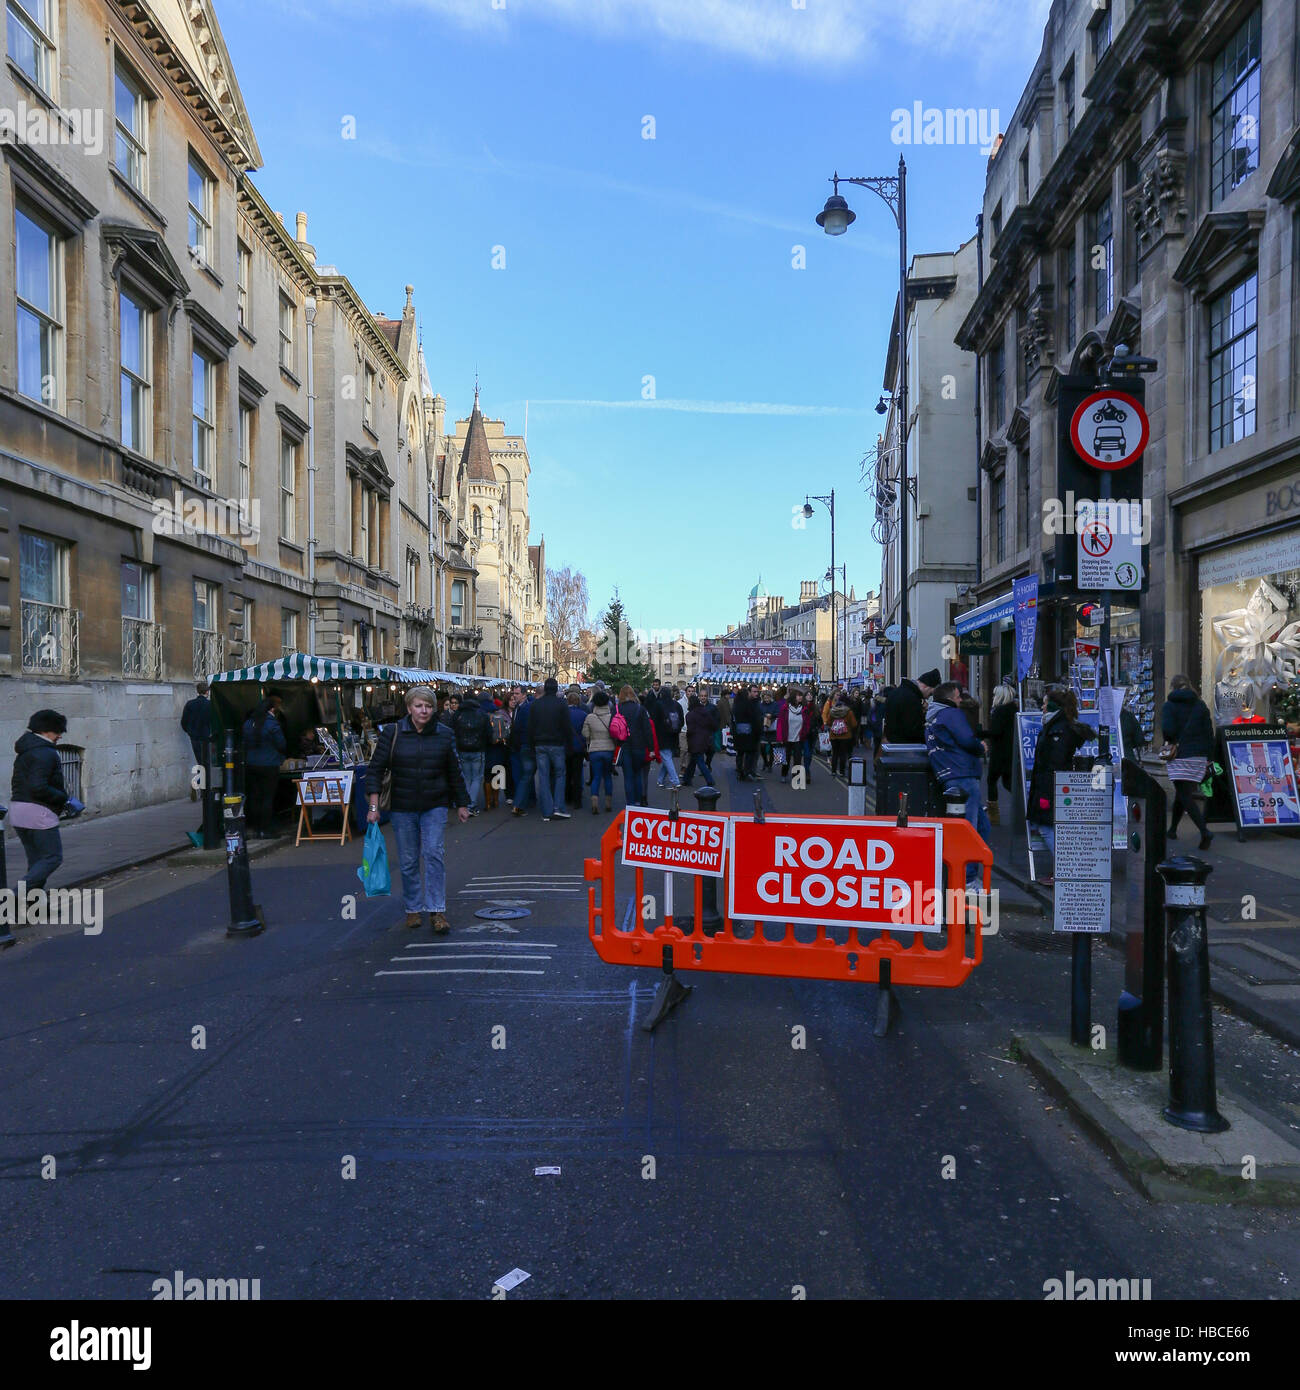 Broad Street, Oxford, United Kingdom, December 04, 2016: Arts and Crafts Market with open stalls on Broad Street temporary closed for traffic, Oxford. Stock Photo